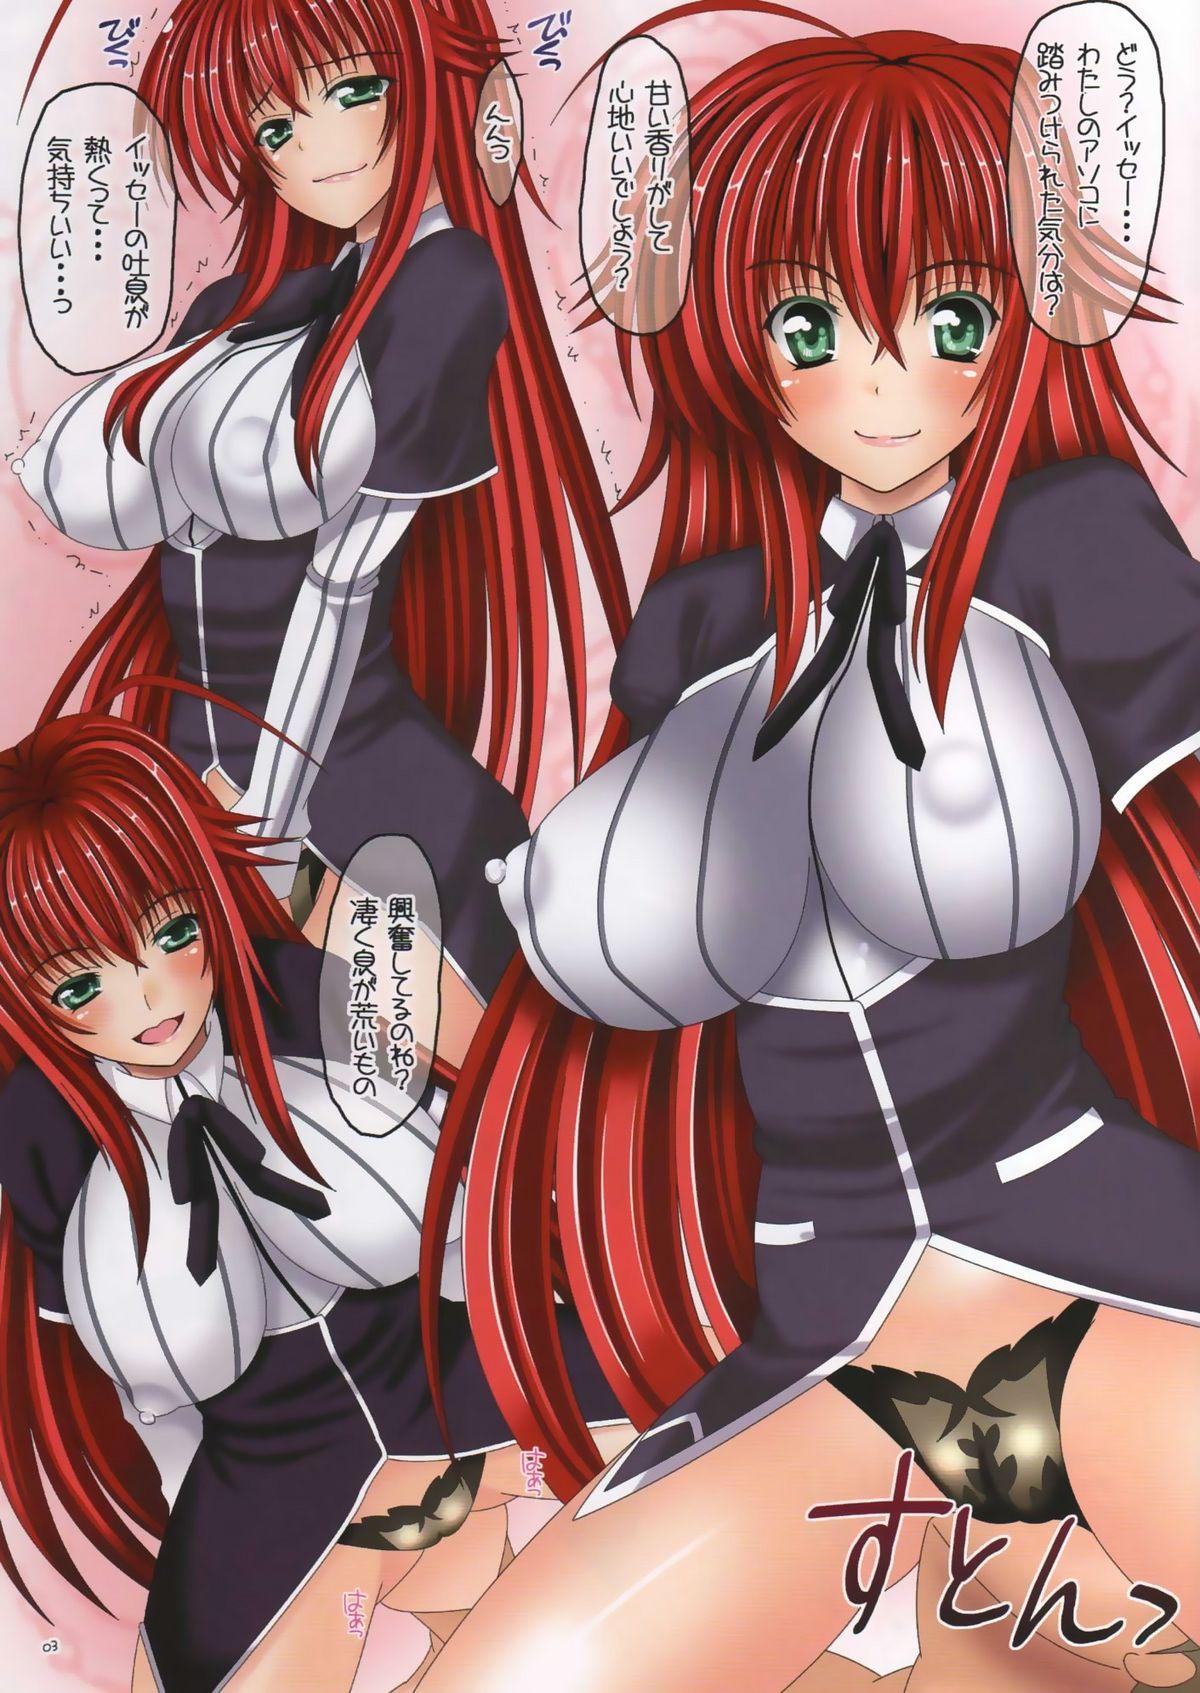 Soles Colorful DxD - Highschool dxd Cheat - Page 2